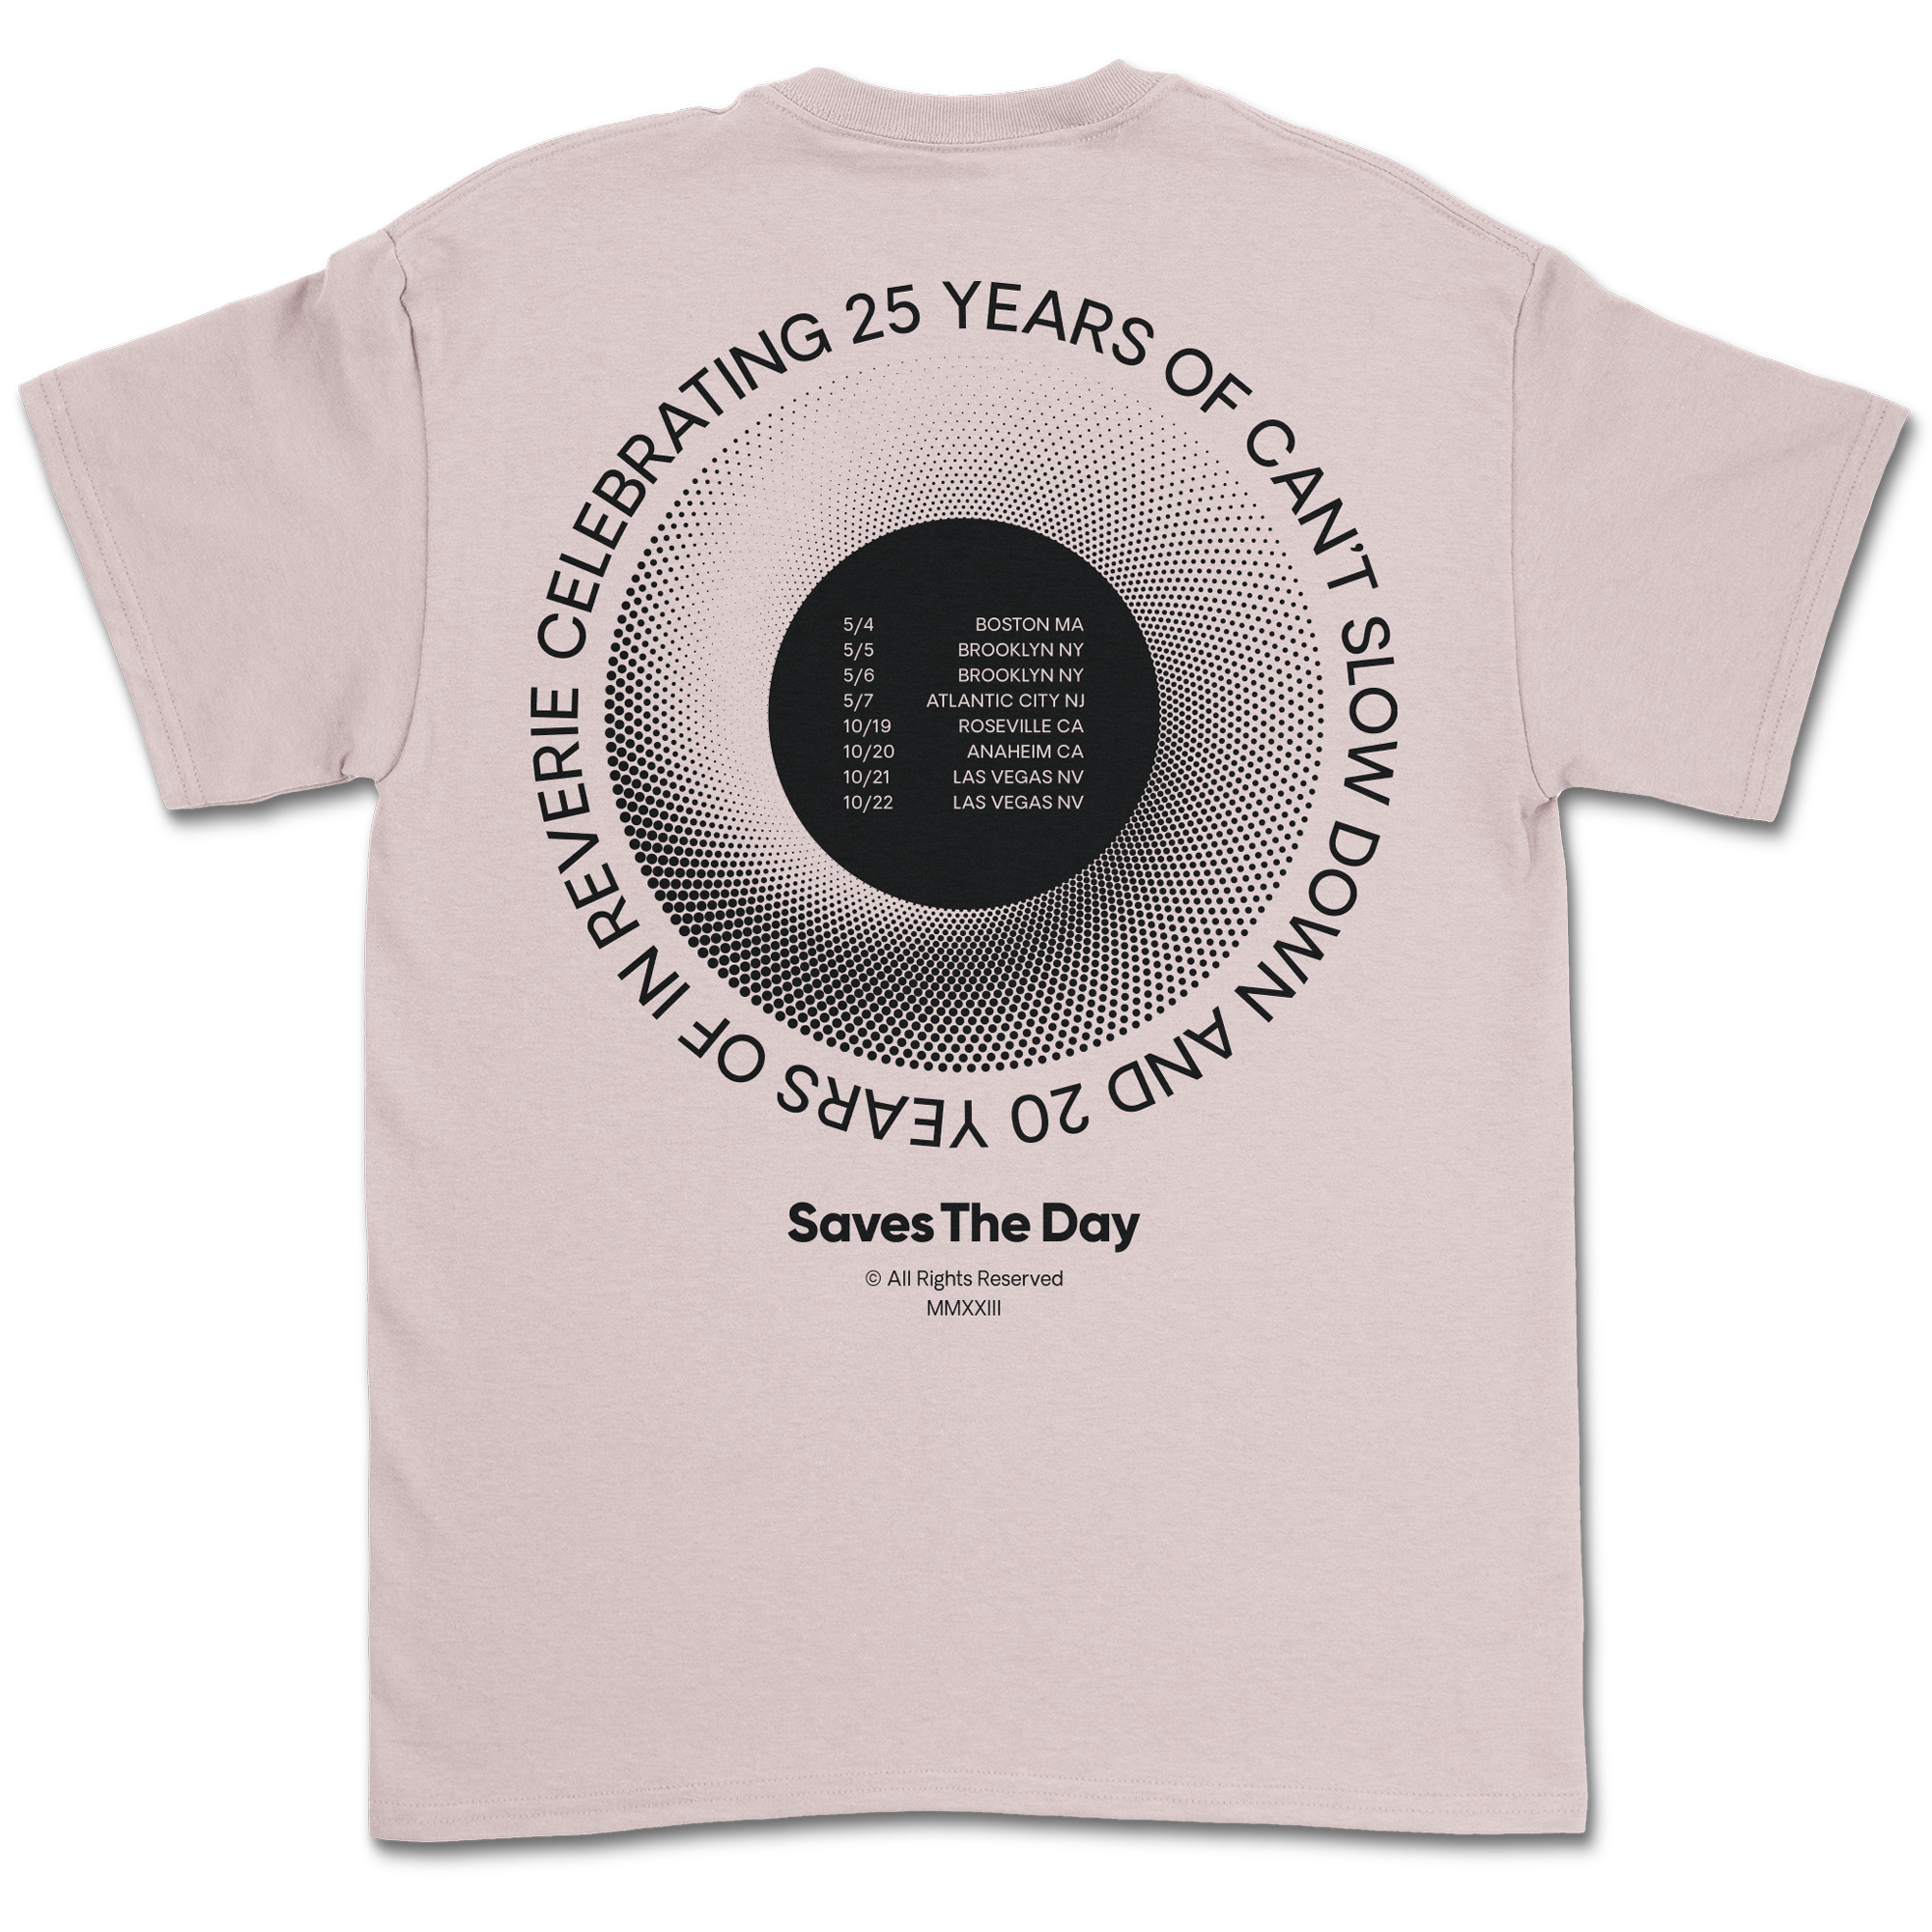 Saves The Day - 25 Years T-Shirt